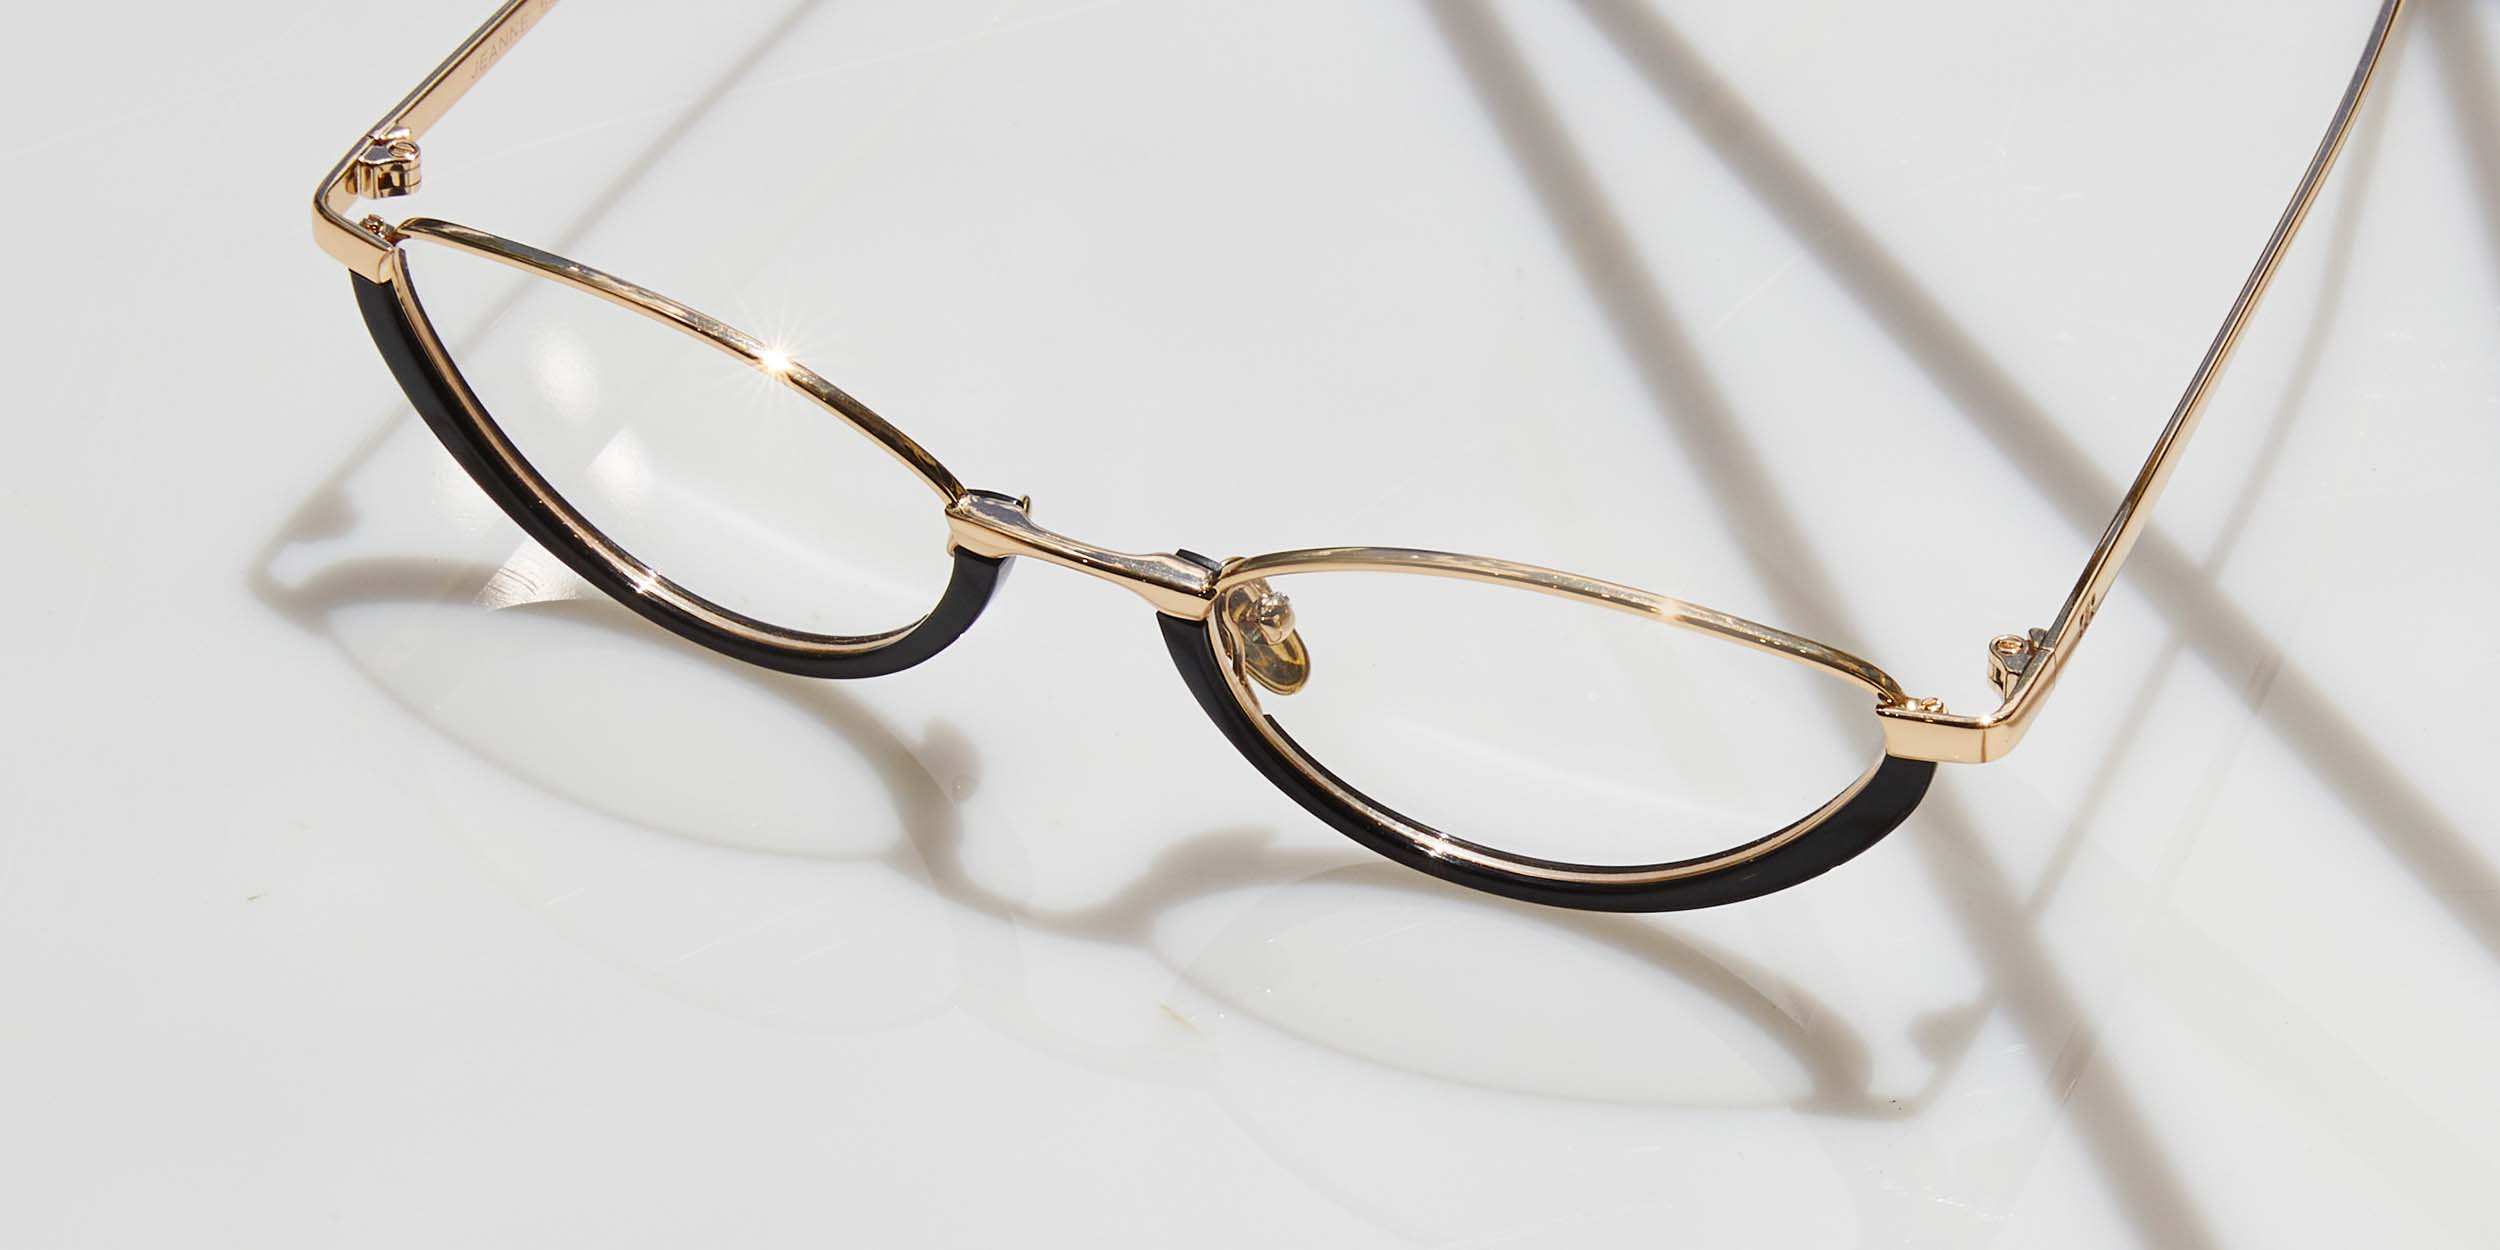 Photo Details of Jeanne Cream & Gold Reading Glasses in a room